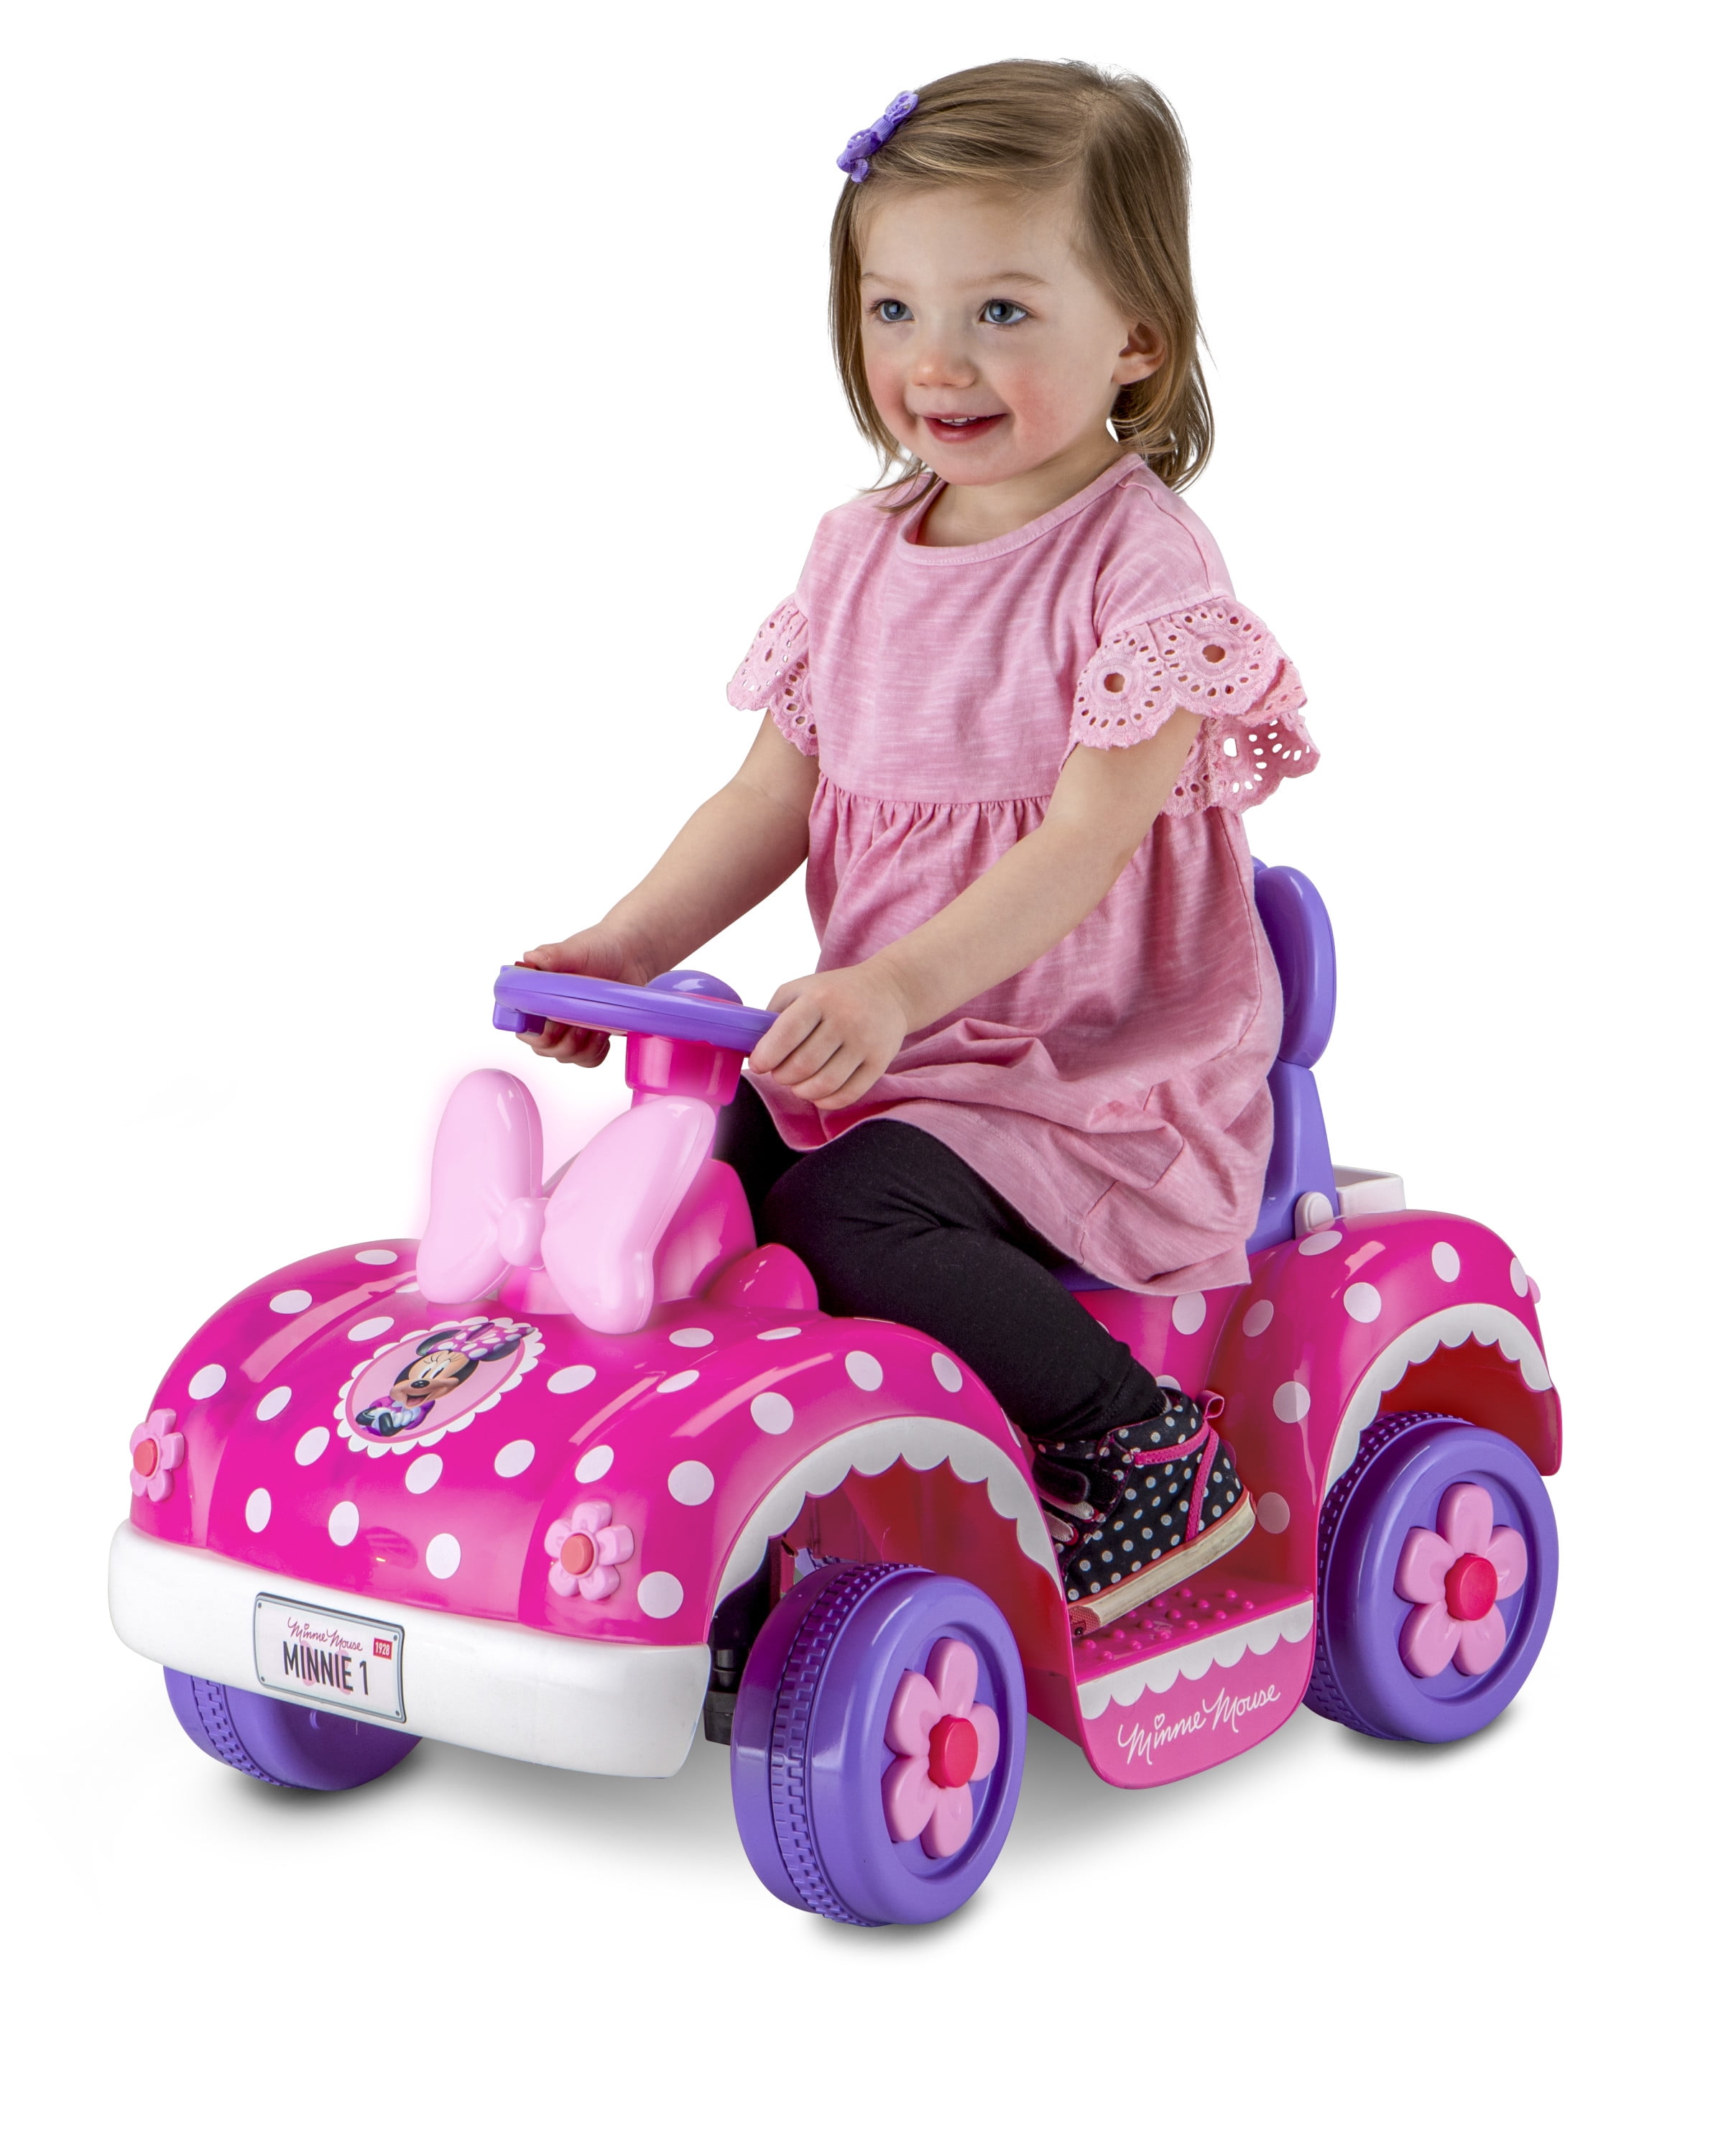 NEW Disney Minnie Mouse Convertible Battery-Powered Ride-On  Car Toy for Girls 